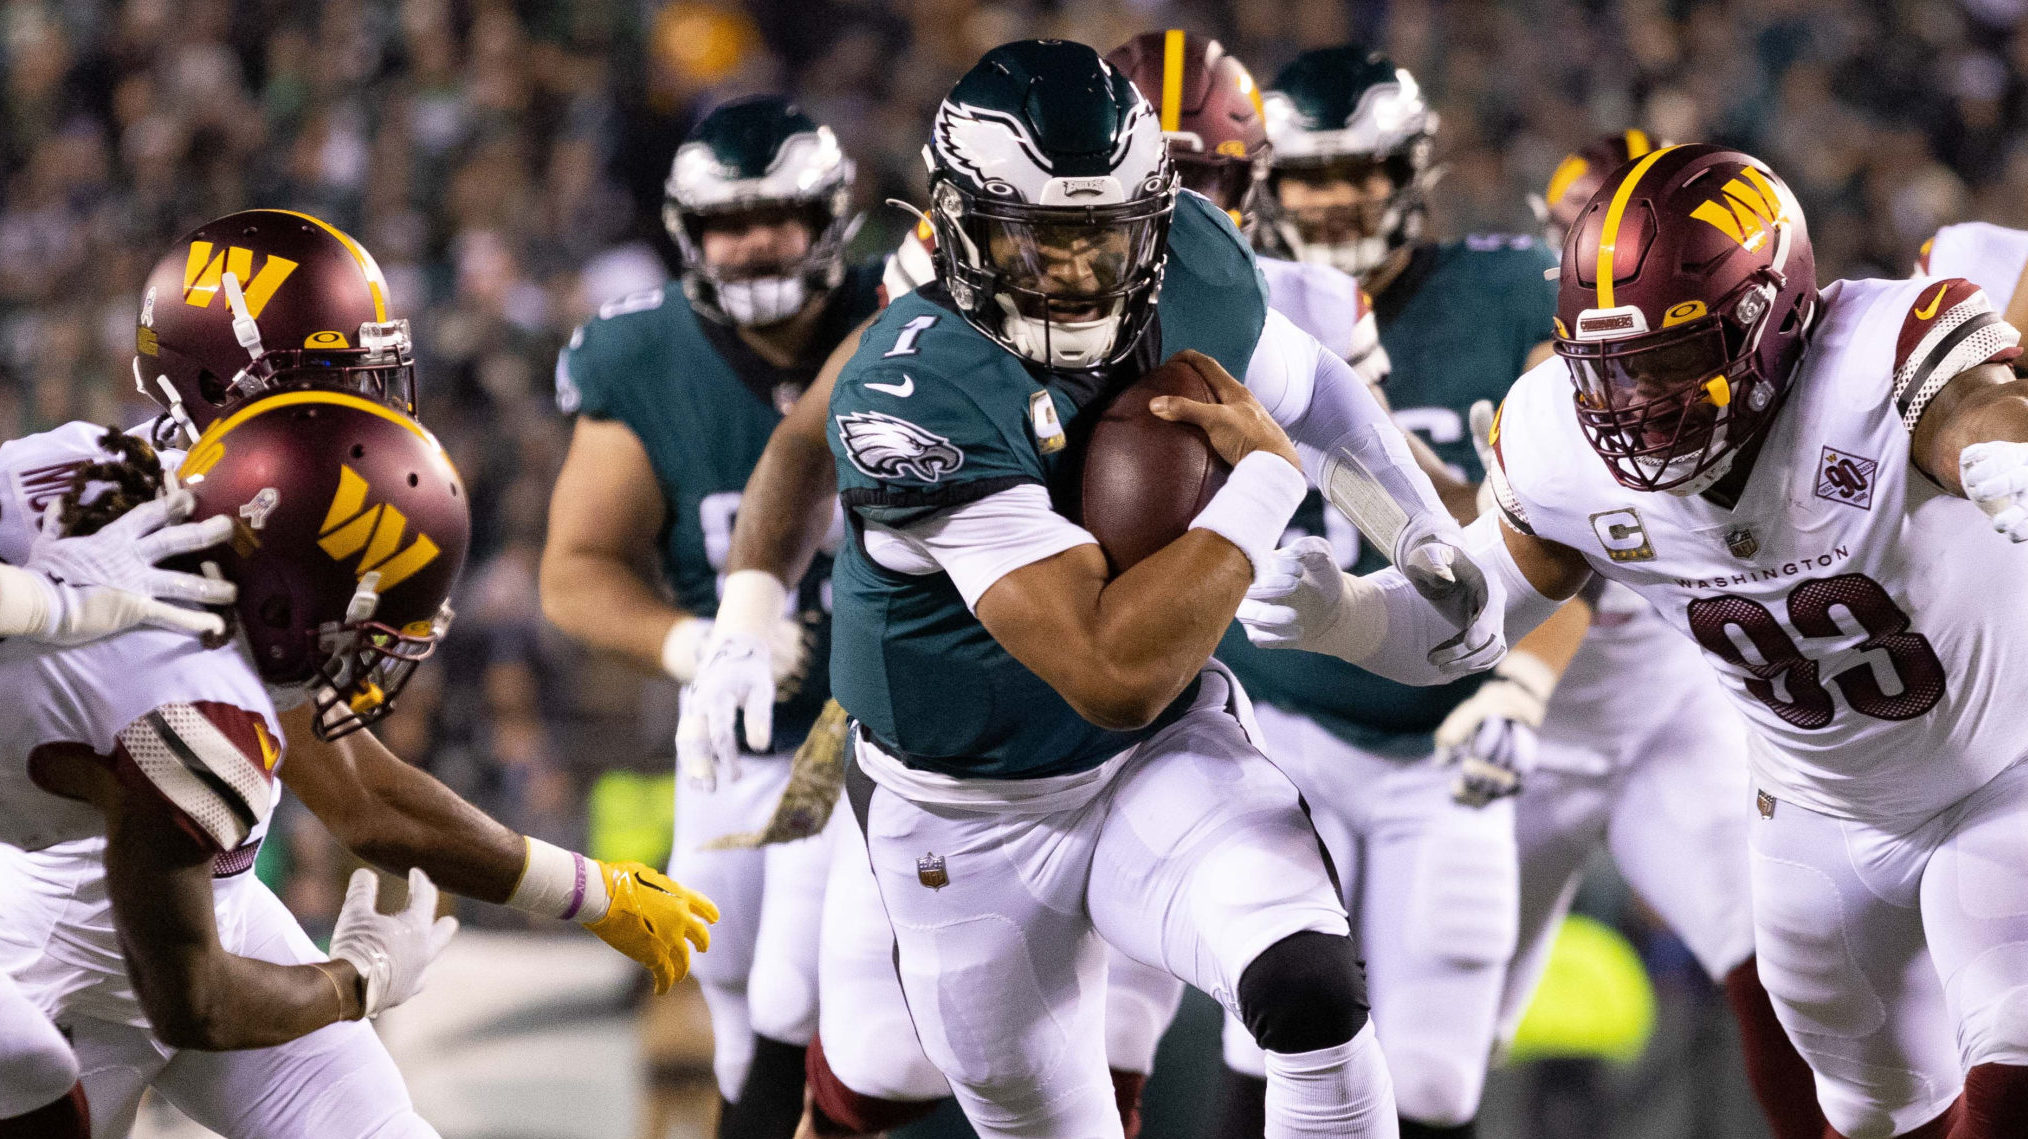 Despite Loss, Eagles’ Pass-First Offense in No Need of Change